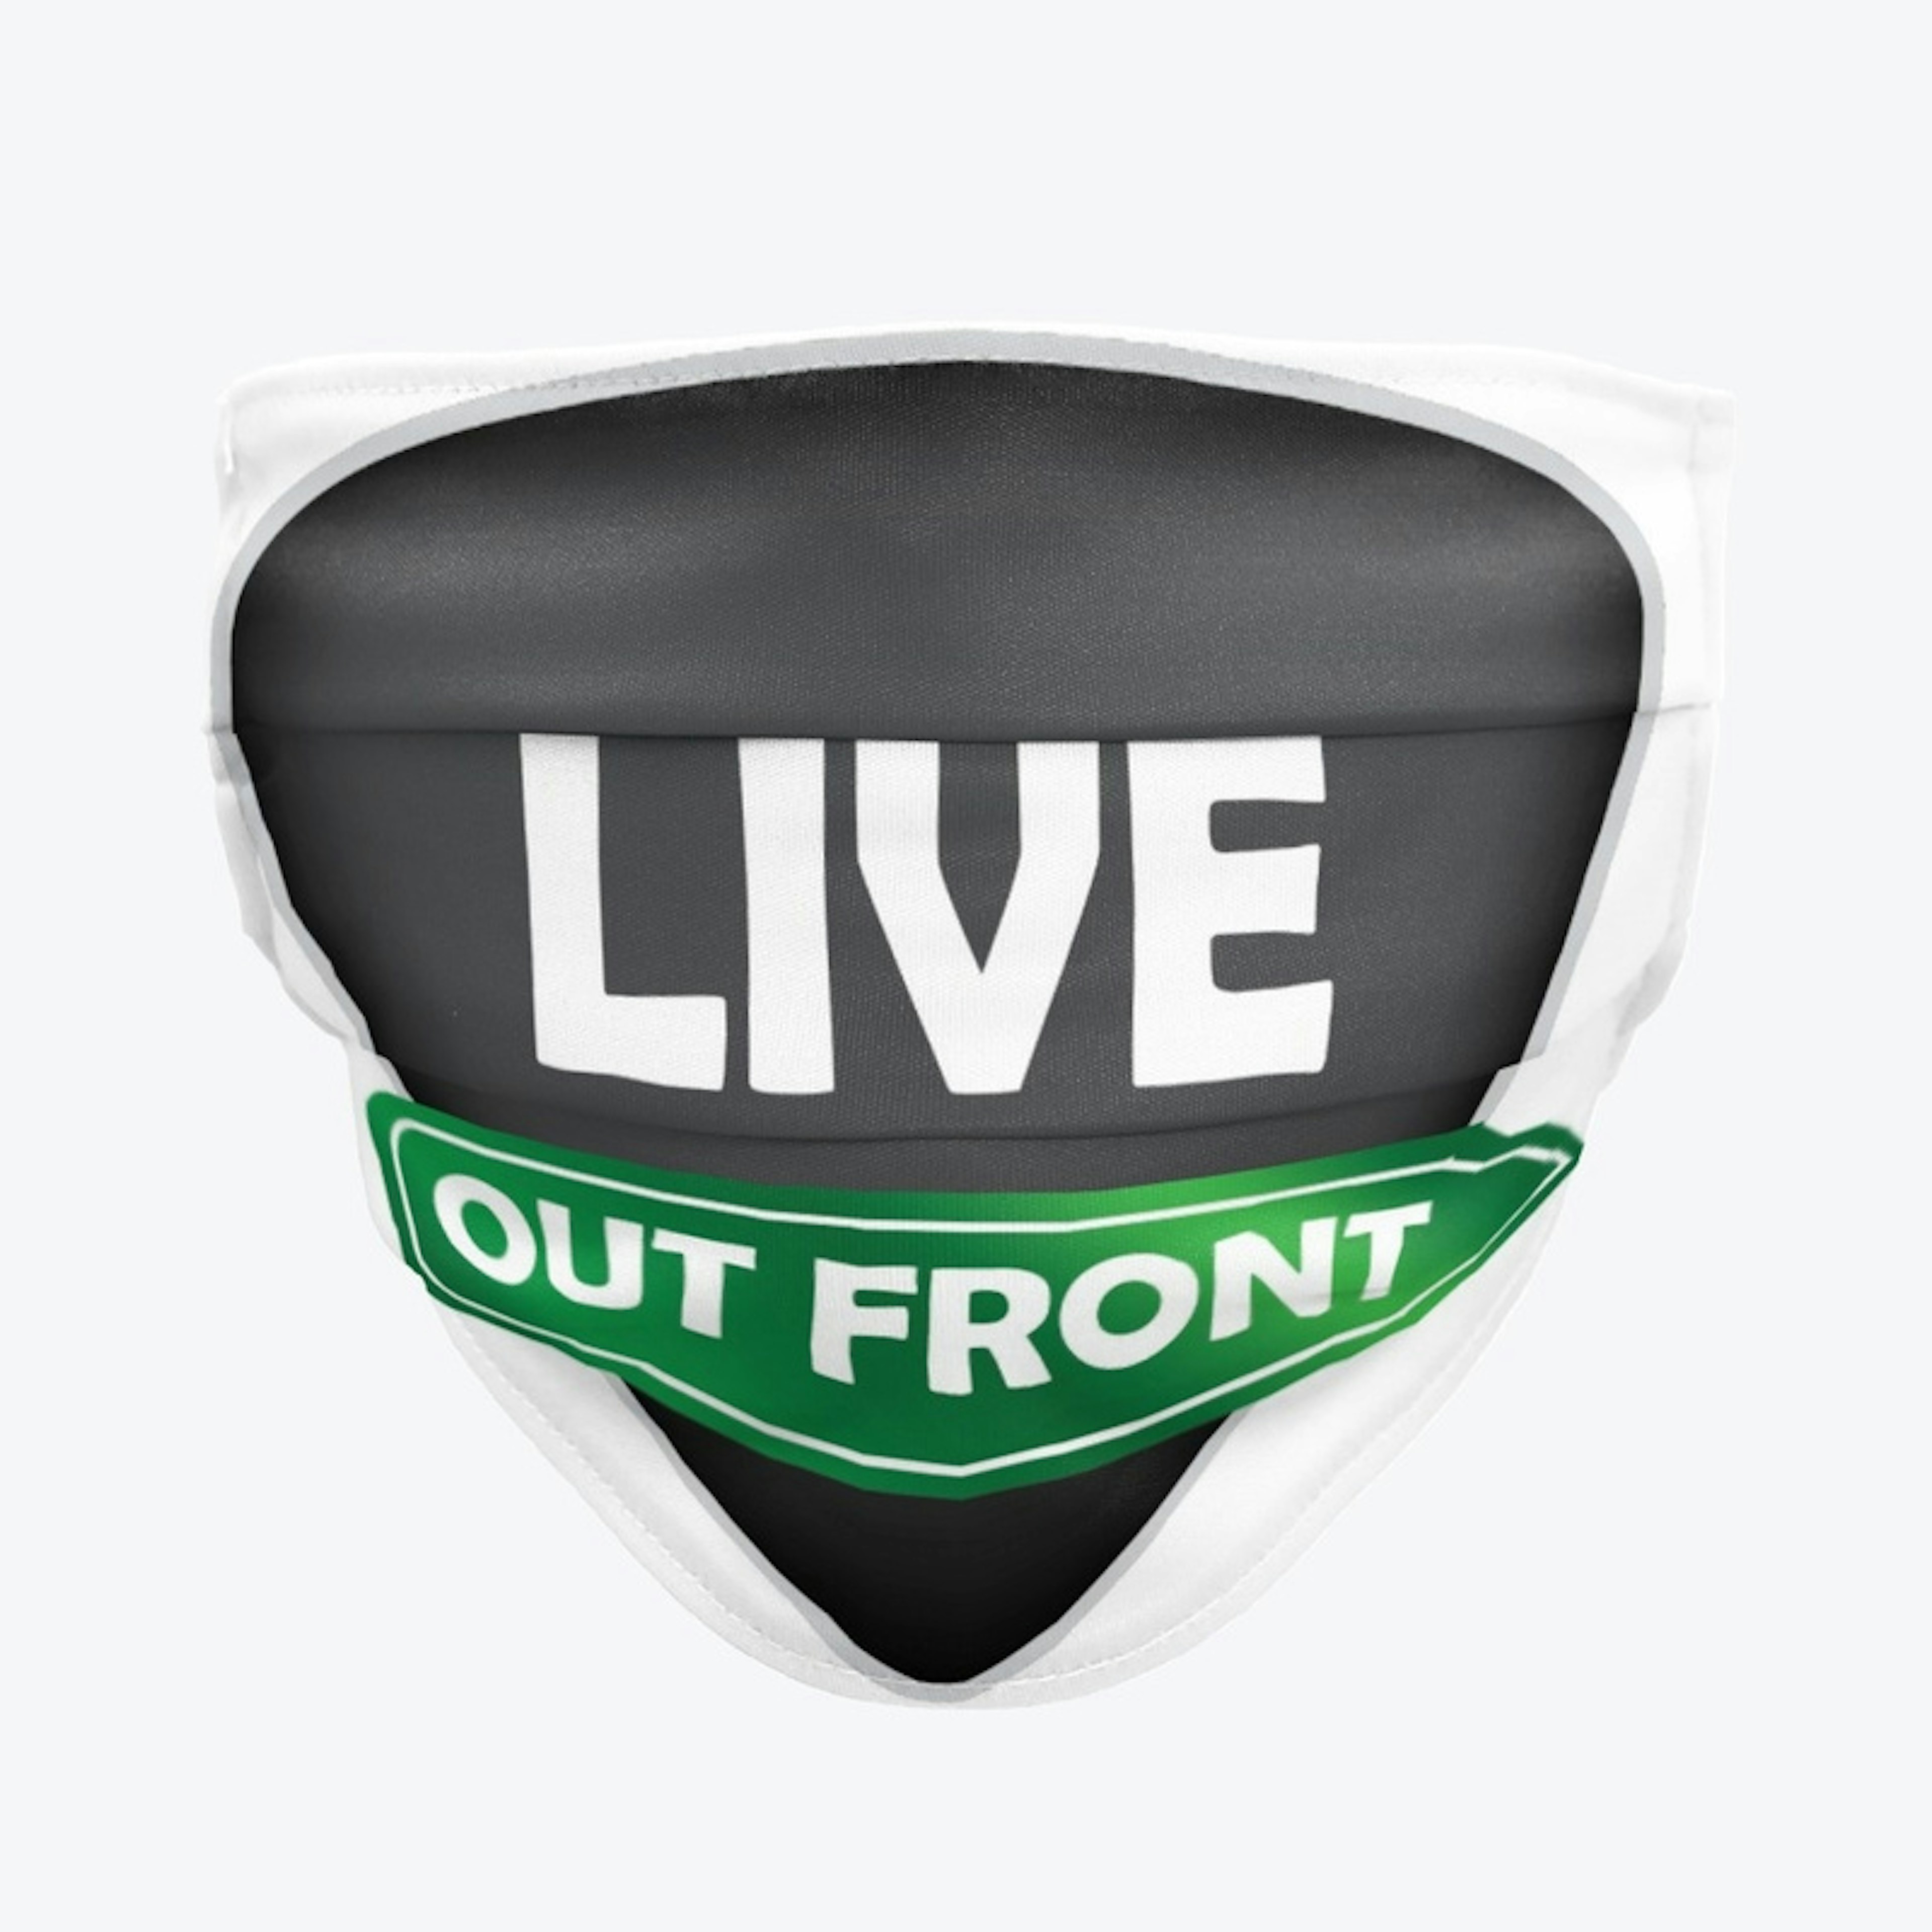 Live Out Front